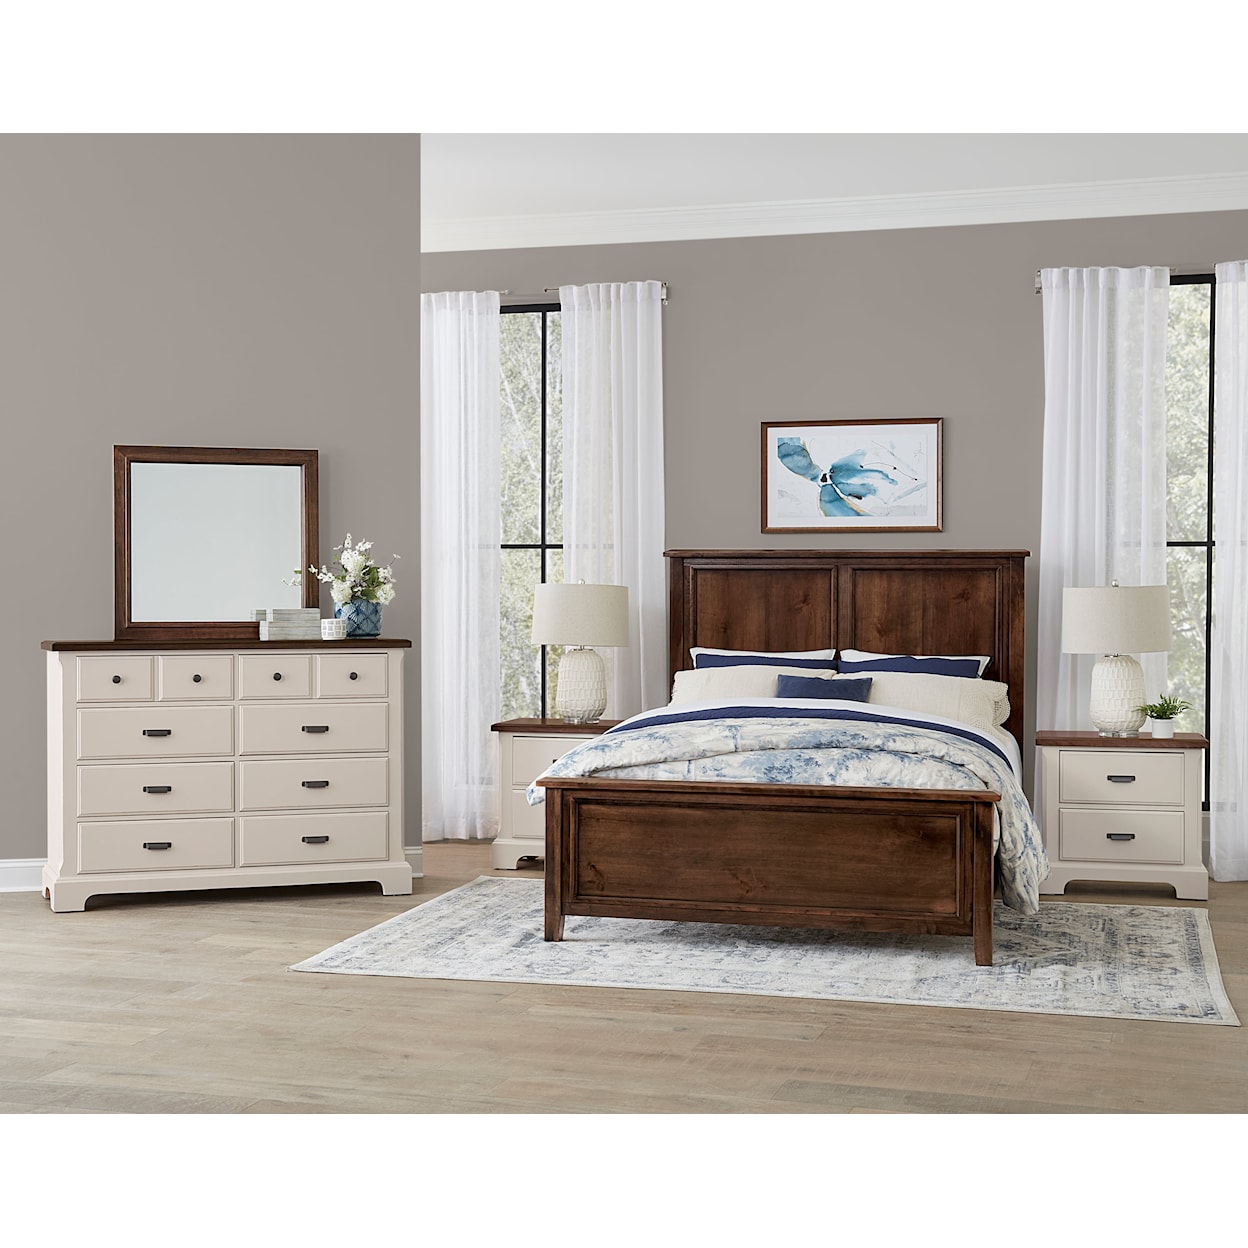 Vaughan Bassett Lancaster County King Amish Panel Bed